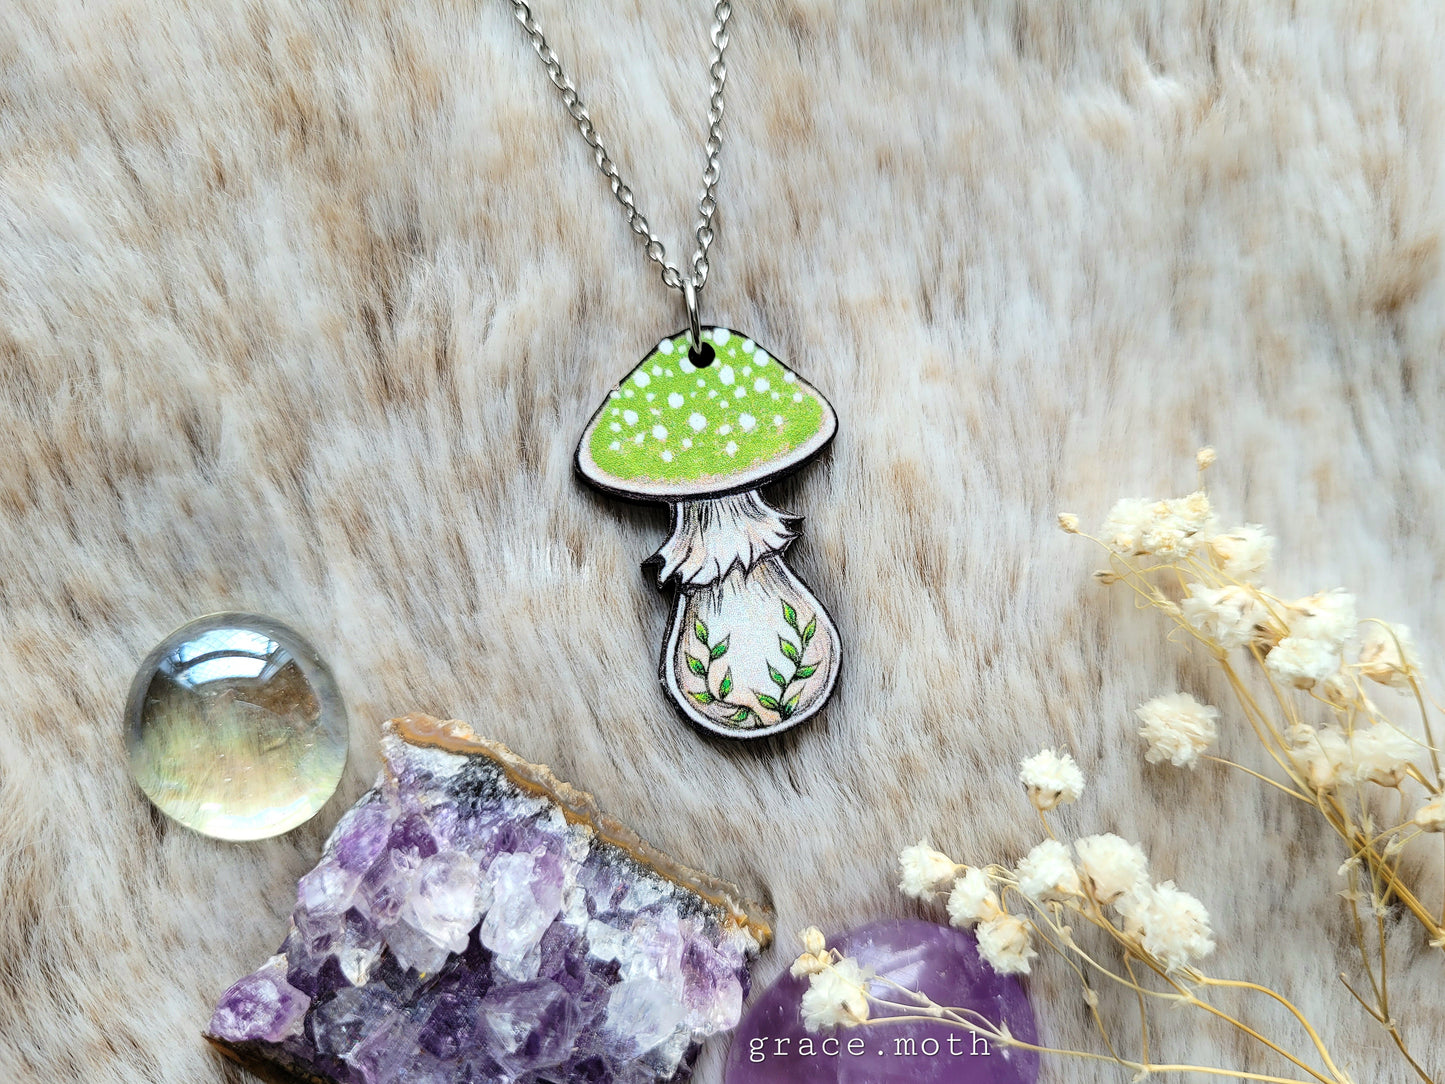 Green Mushroom illustrated necklace, responsibly sourced cherry wood, chain options available, by Grace Moth